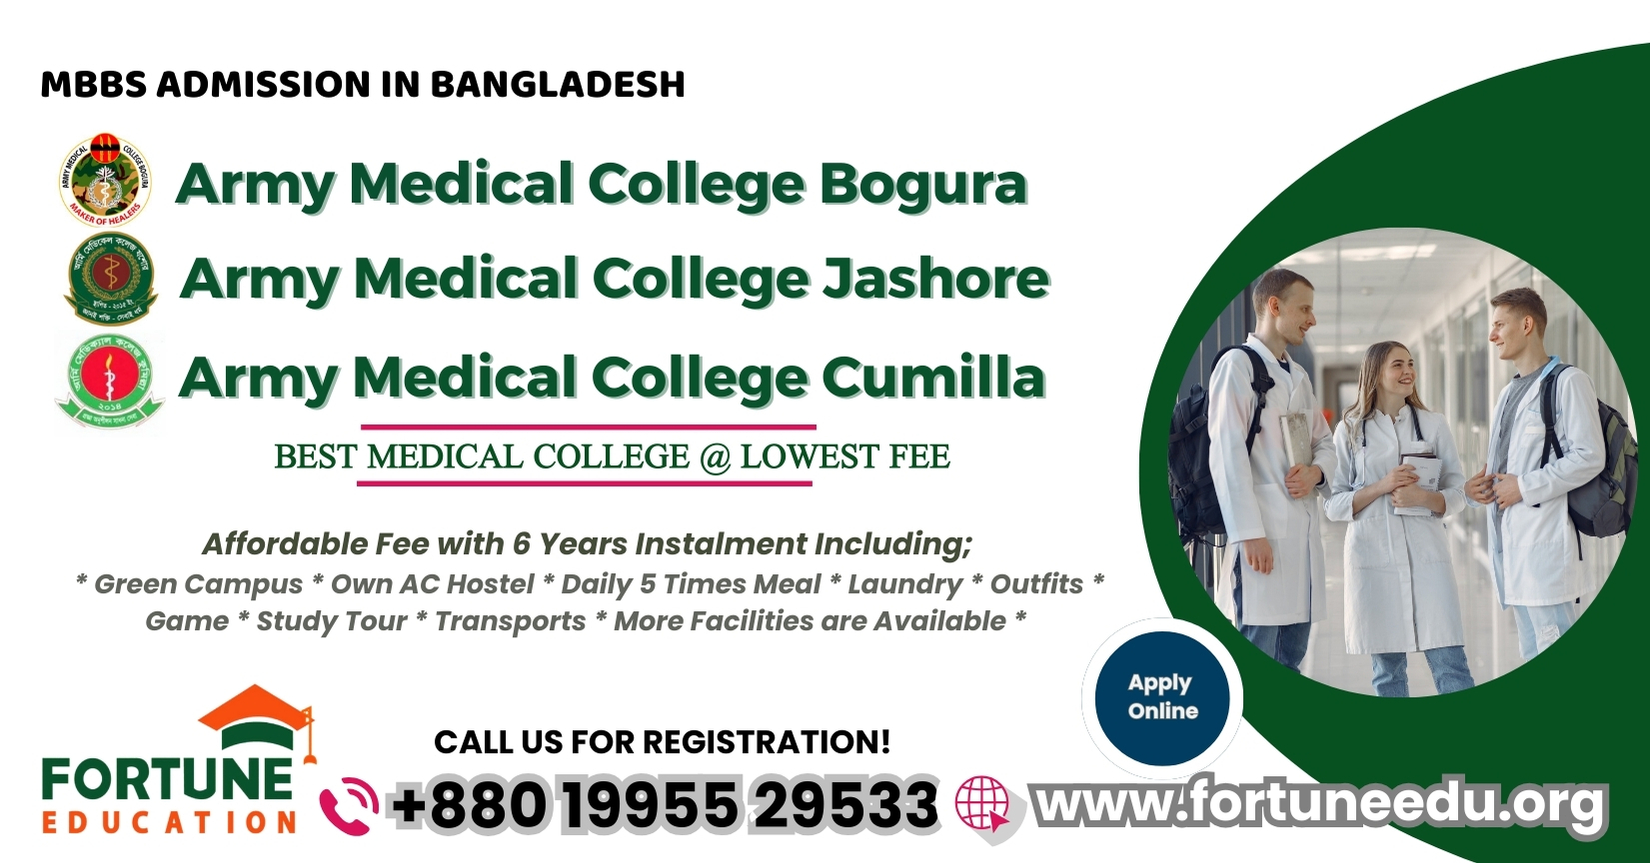 MBBS in Bangladesh at Army Medical Colleges